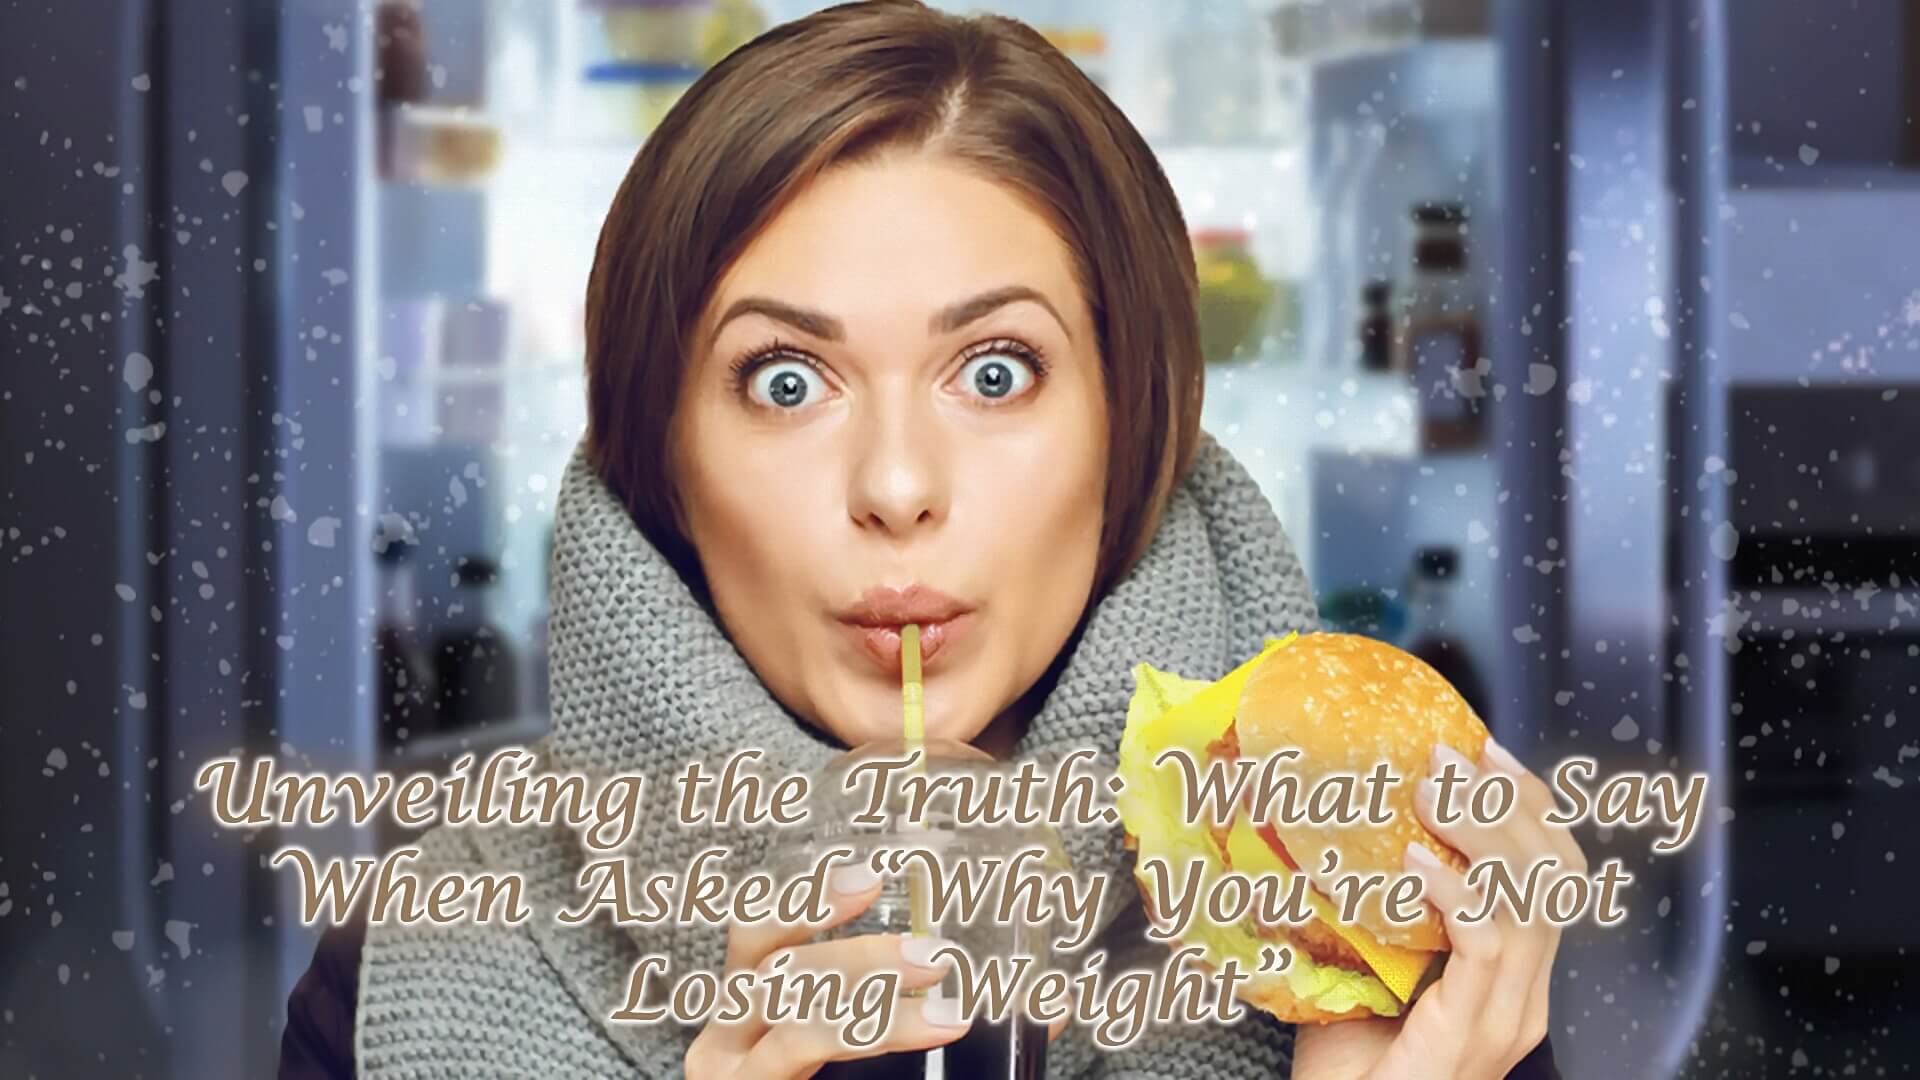 What to Say When Asked “Why You’re Not Losing Weight”